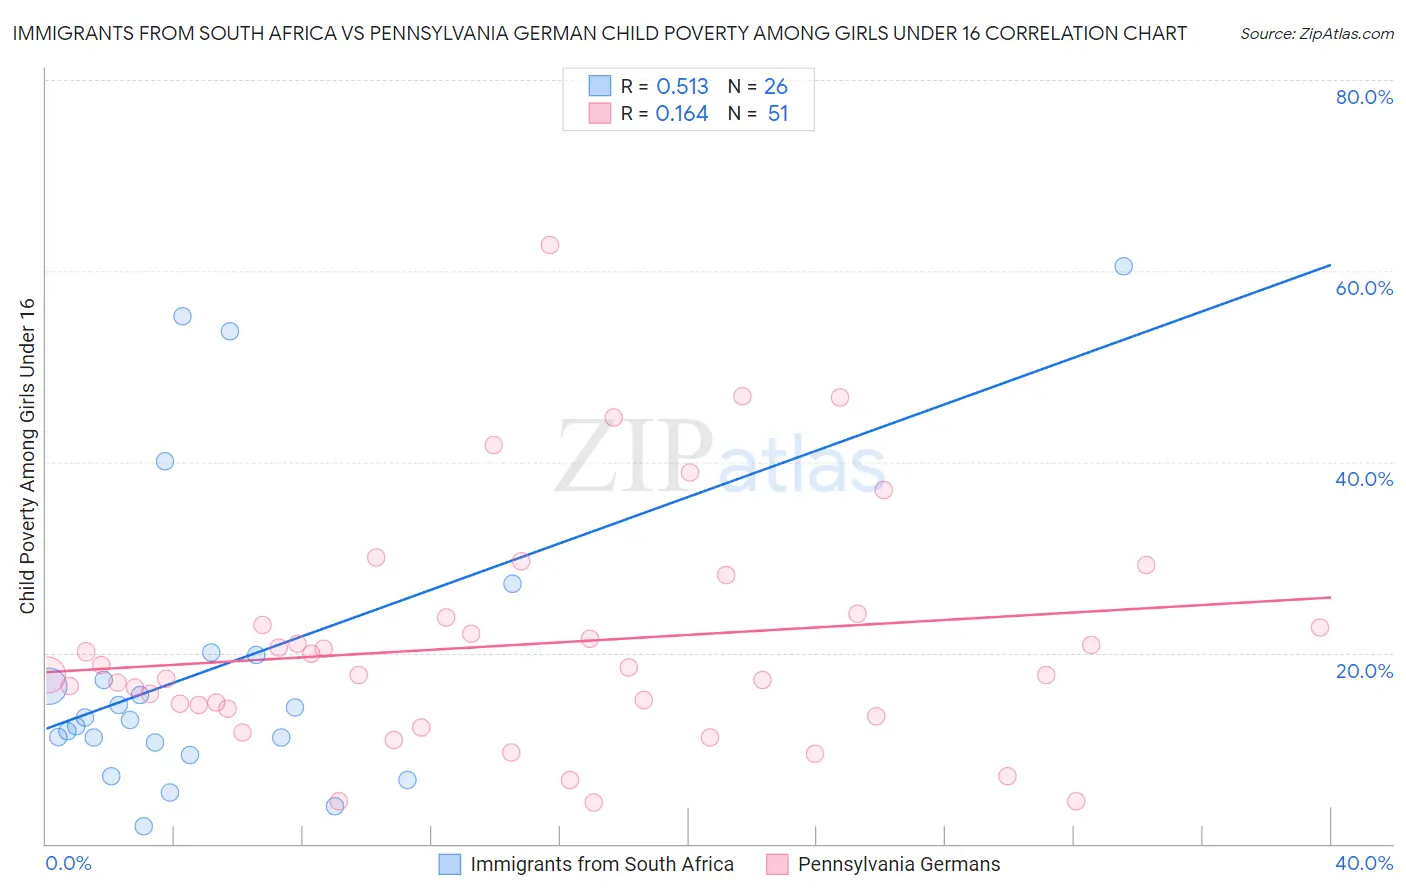 Immigrants from South Africa vs Pennsylvania German Child Poverty Among Girls Under 16